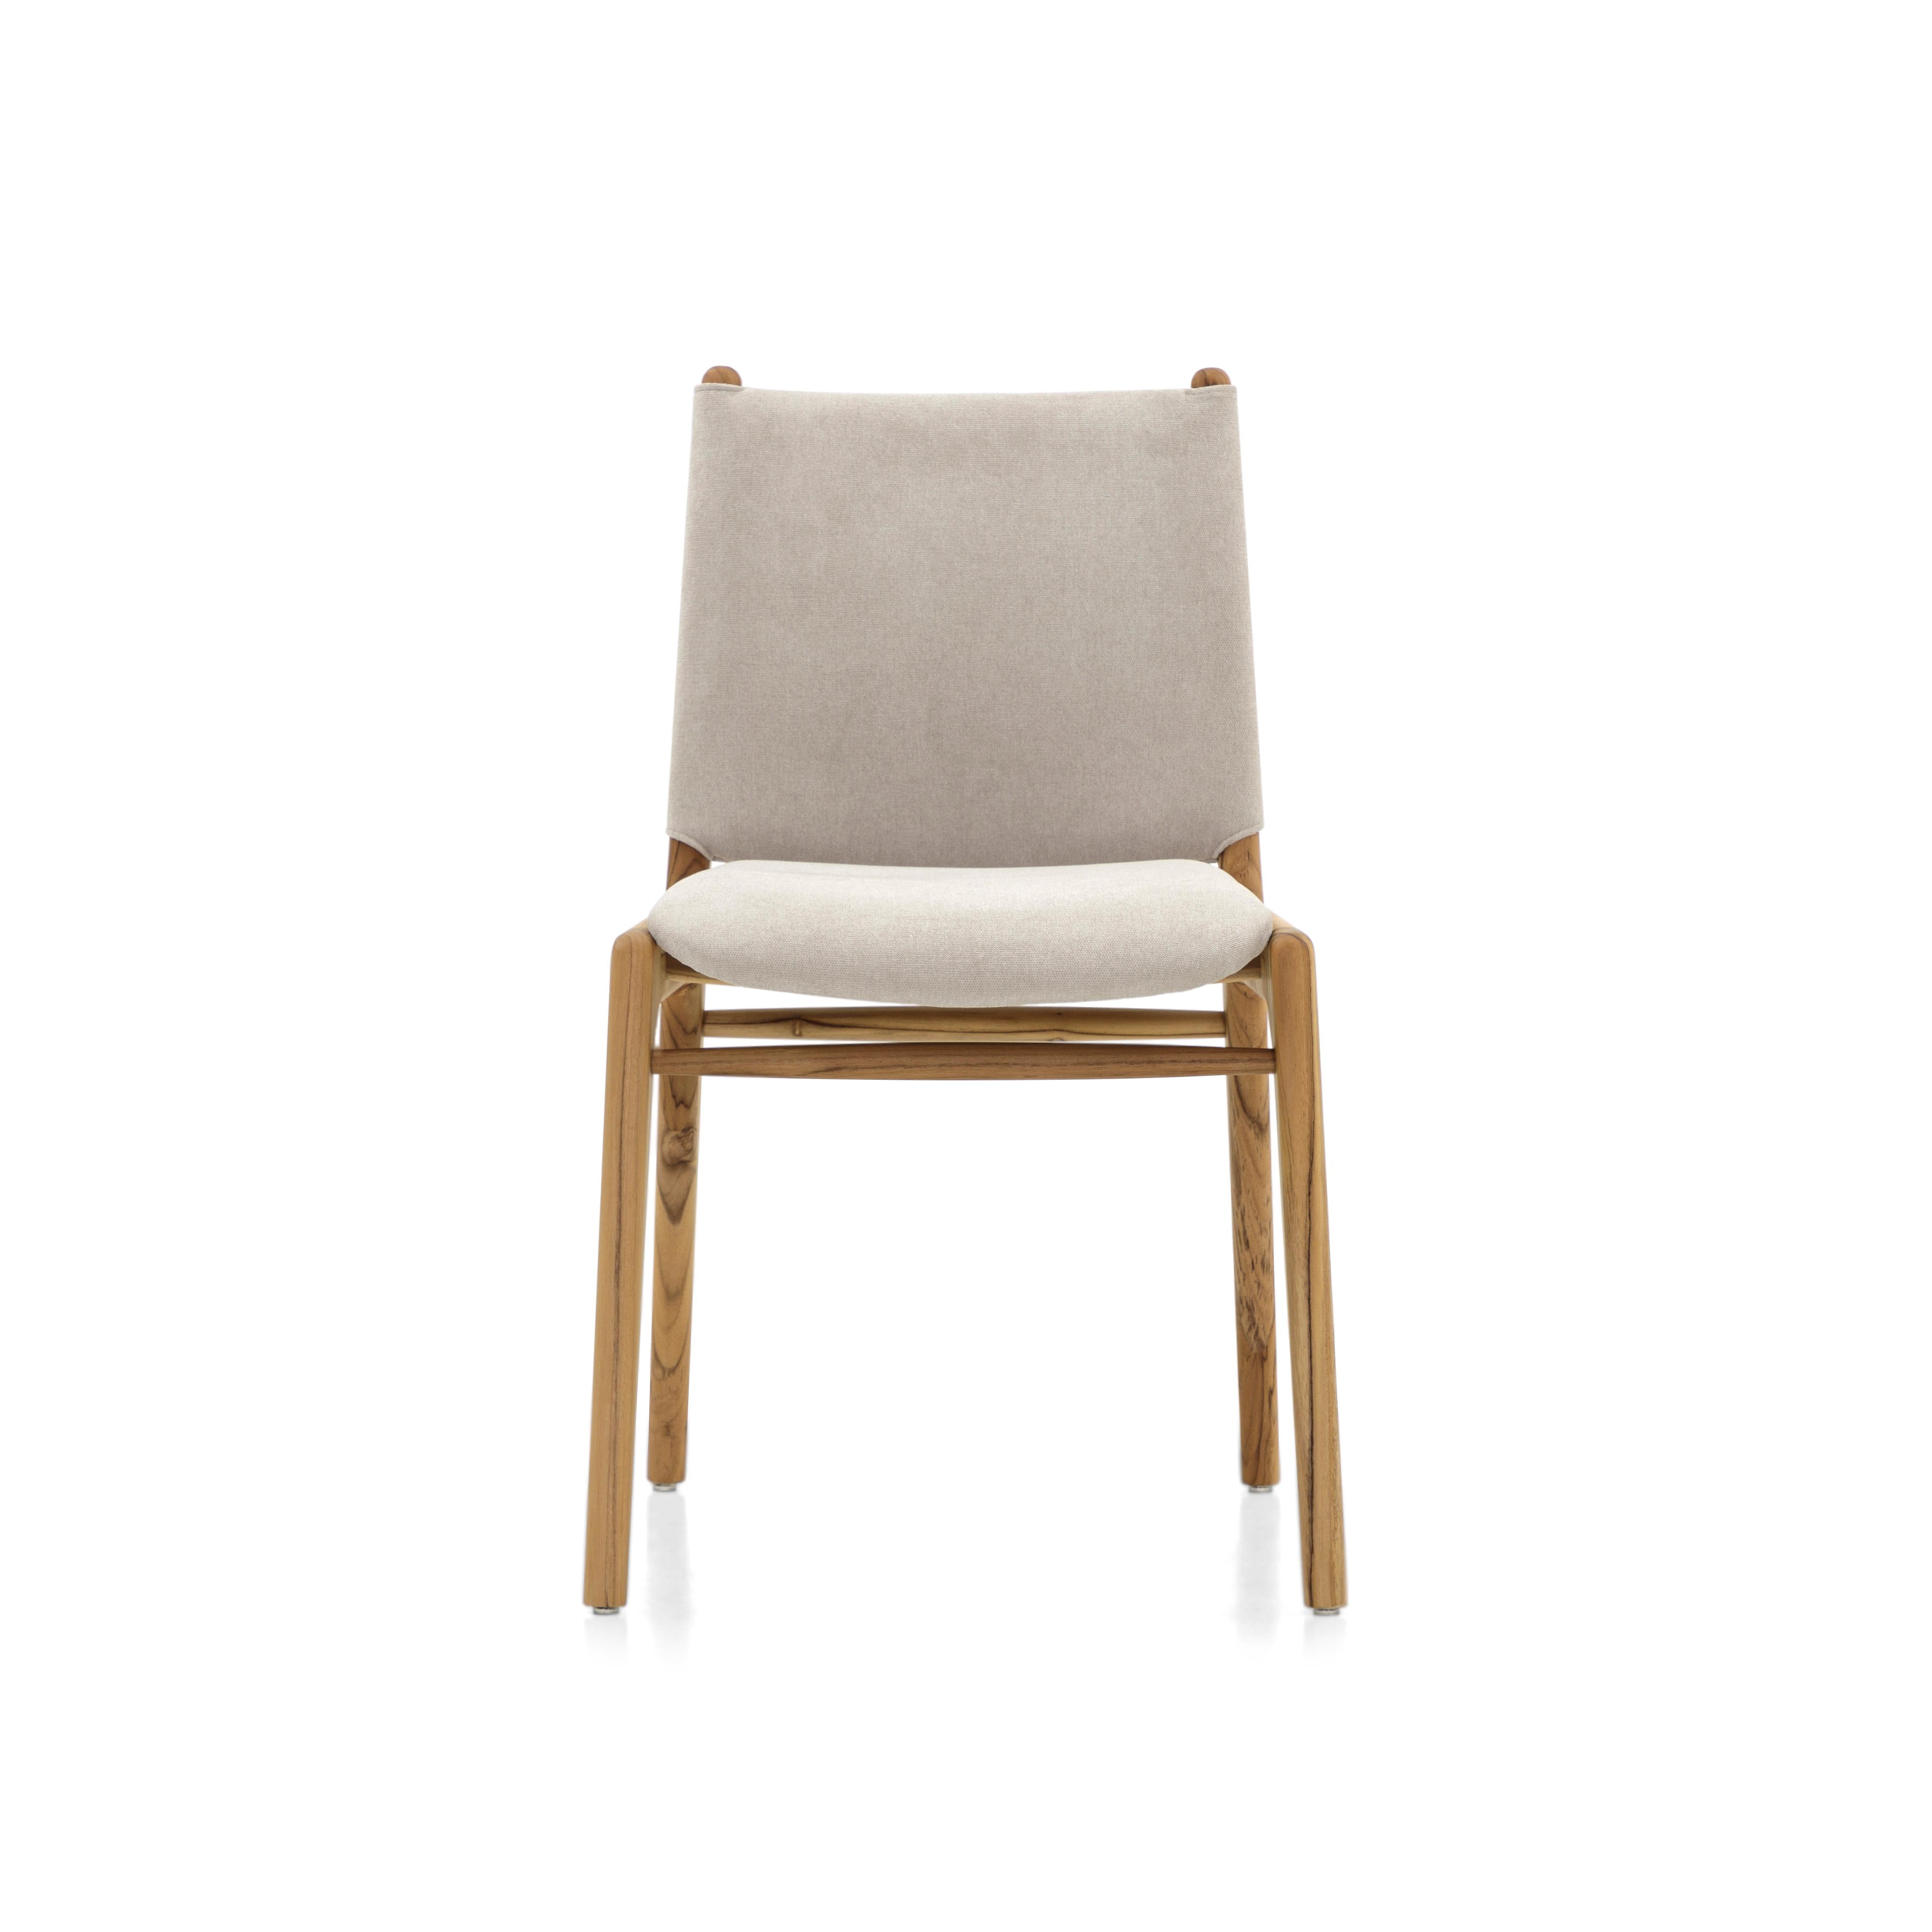 Cappio Dining Chair in Teak Wood Finish with Ivory Fabric, Set of 2 For Sale 3